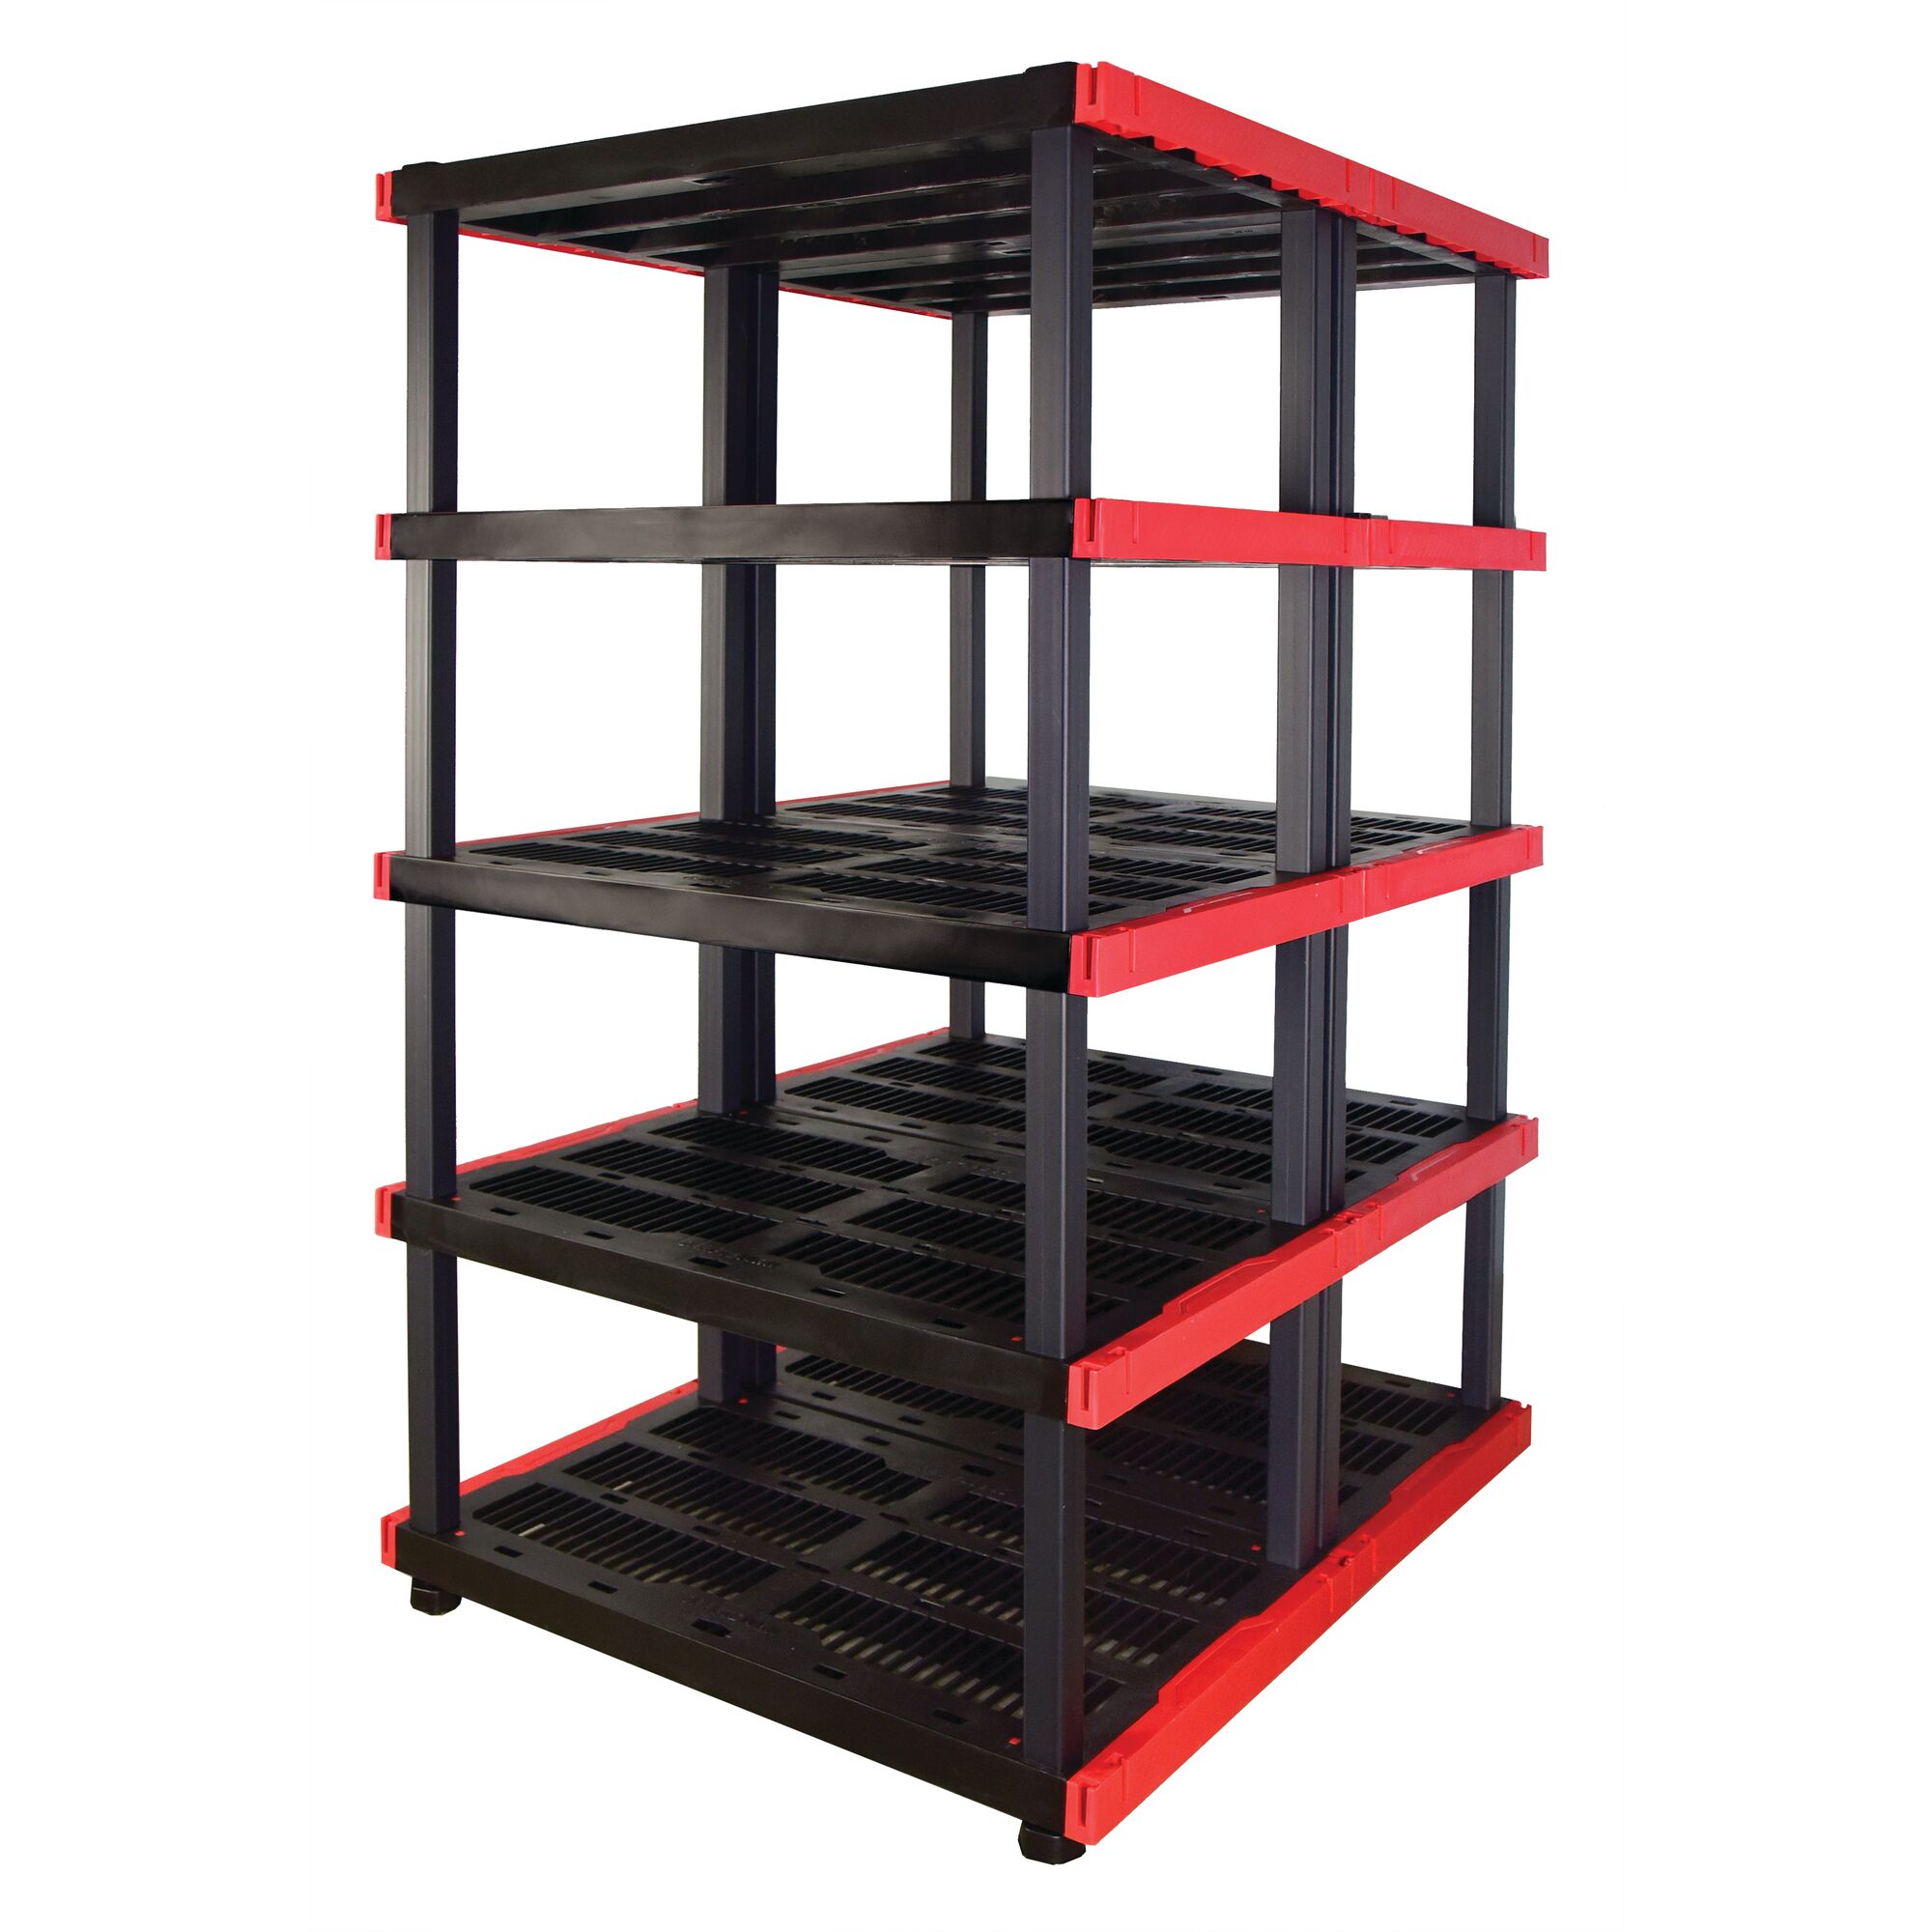 Profile of 24 by 40 ventilated 5 tier shelf.